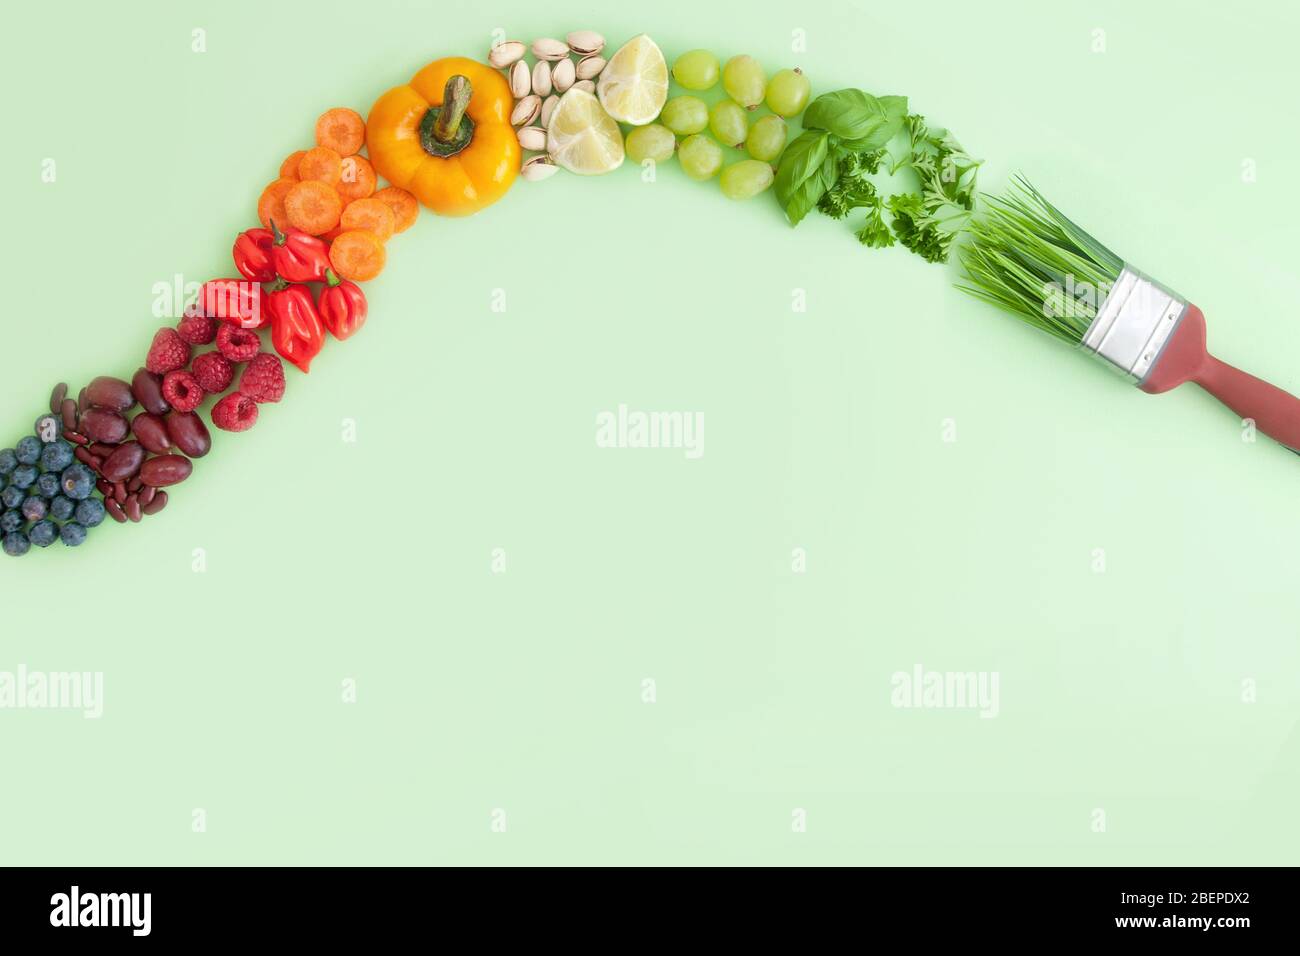 https://c8.alamy.com/comp/2BEPDX2/green-food-brush-stroke-with-assorted-colourful-food-groups-including-fruits-vegetables-nuts-and-grains-2BEPDX2.jpg